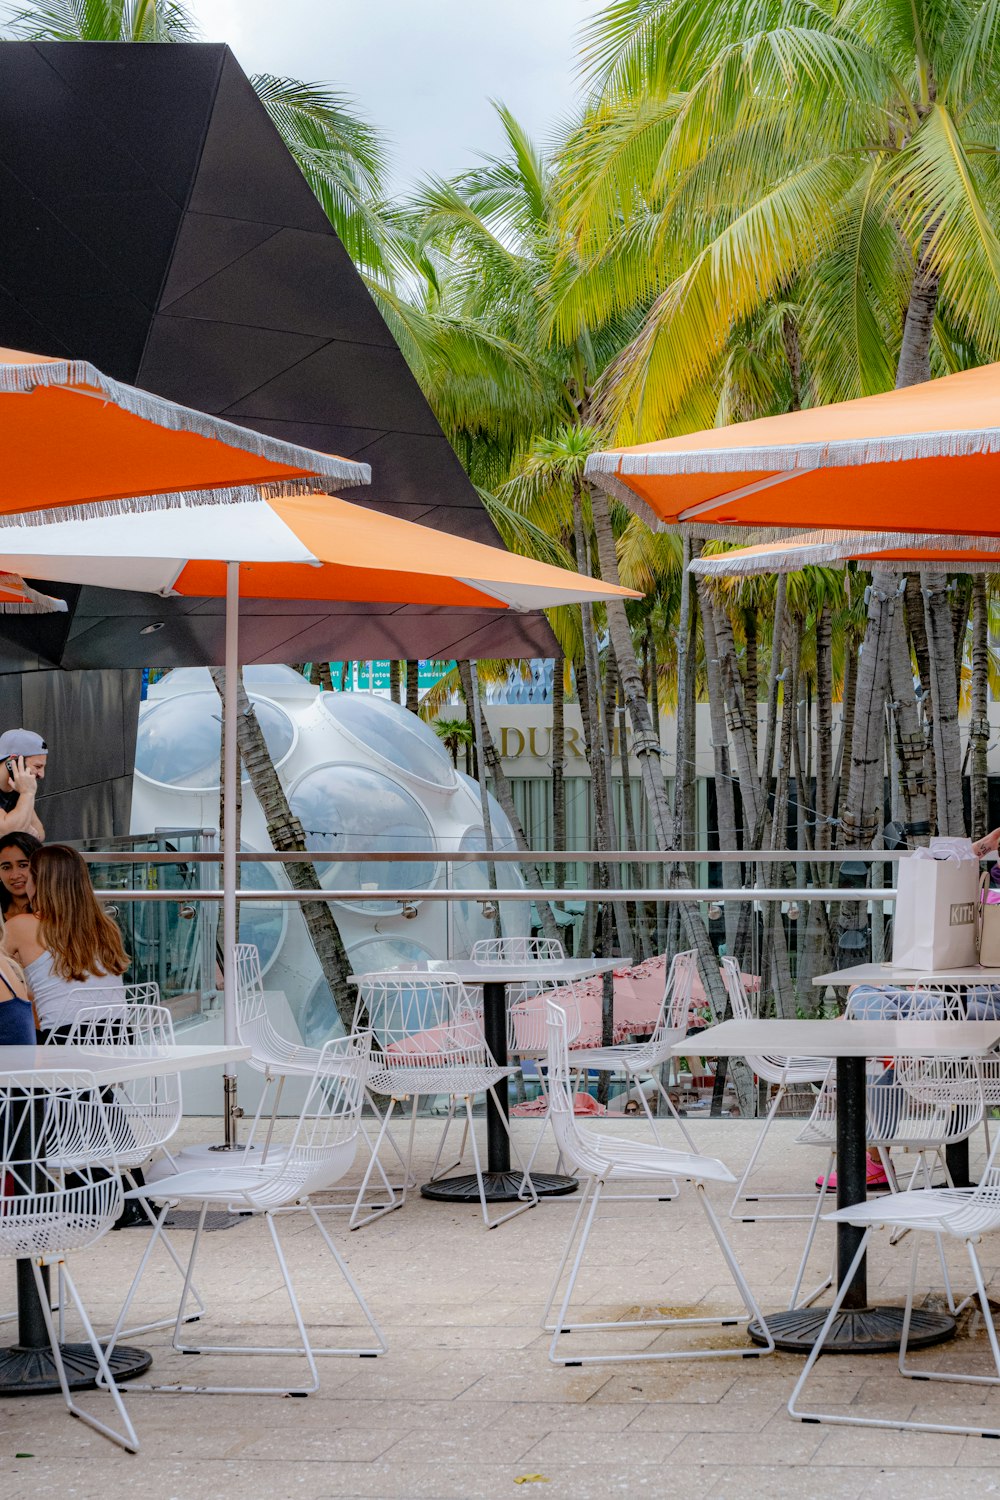 a group of people sitting at tables under umbrellas